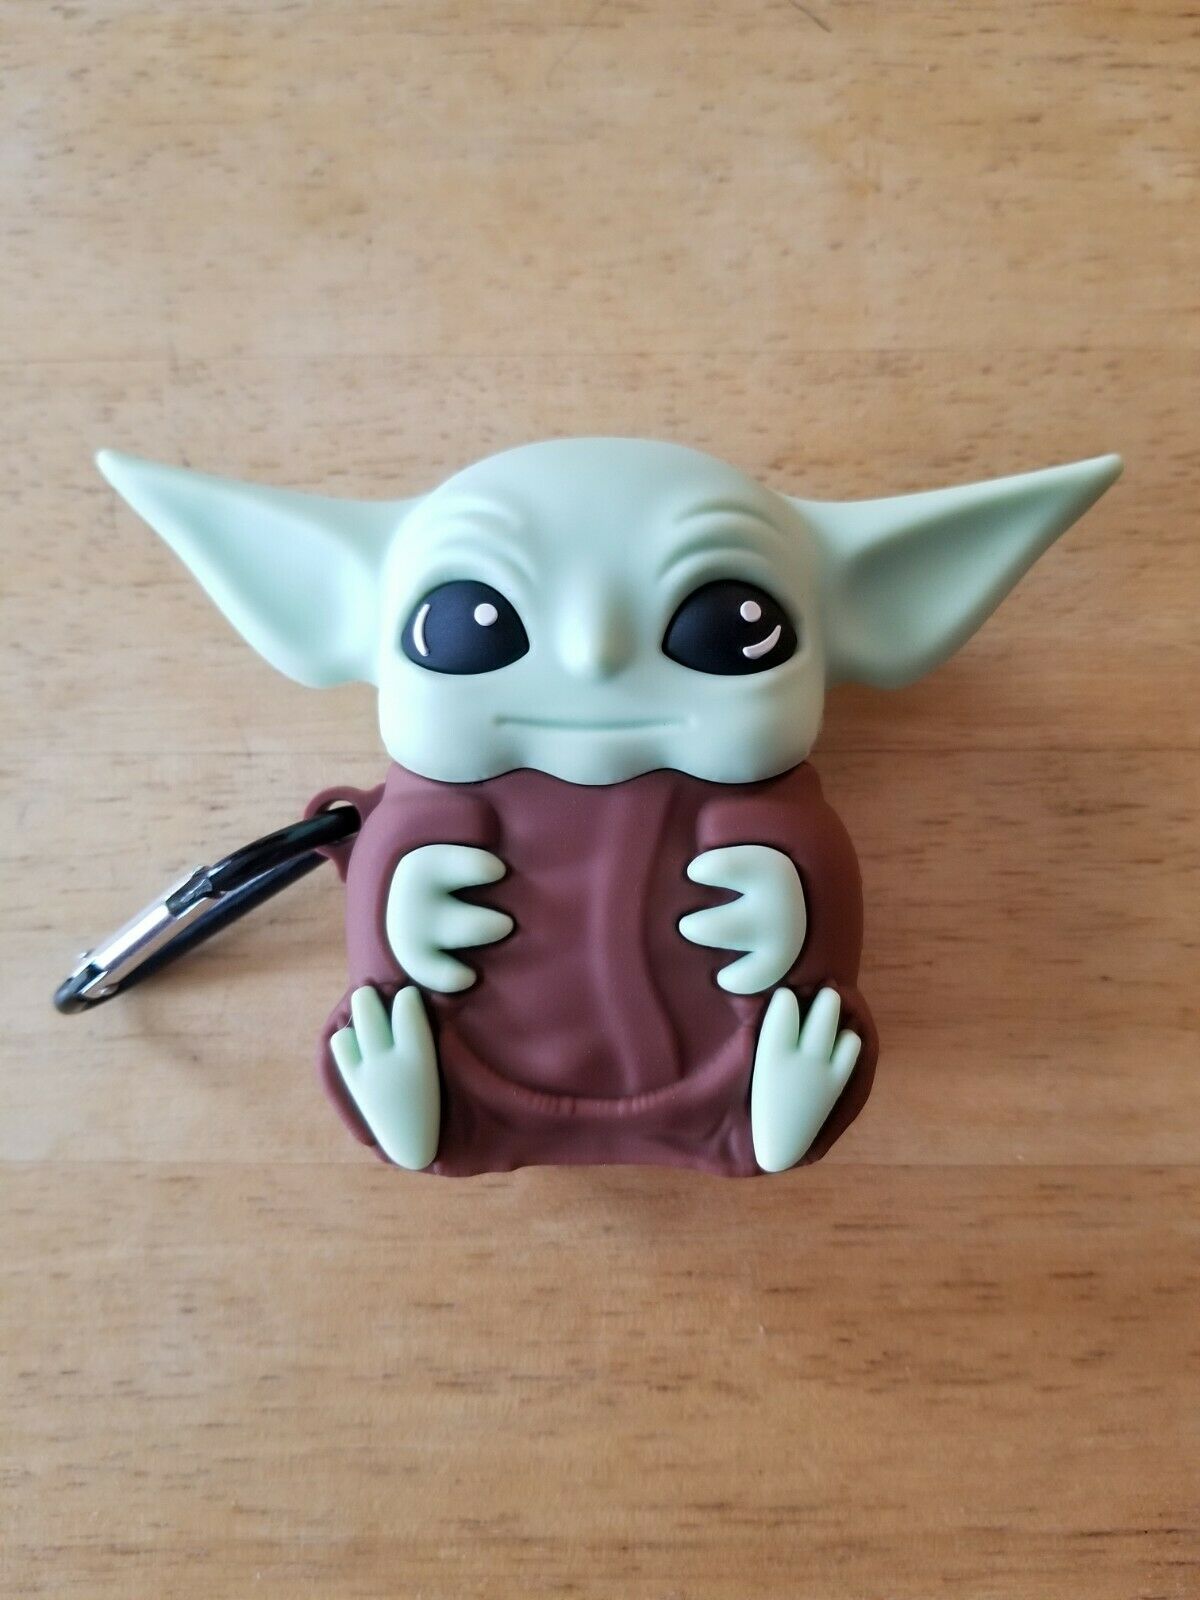 Baby Yoda Airpods Case - Star Wars Mandalorian Themed Silicone Airpod Cover